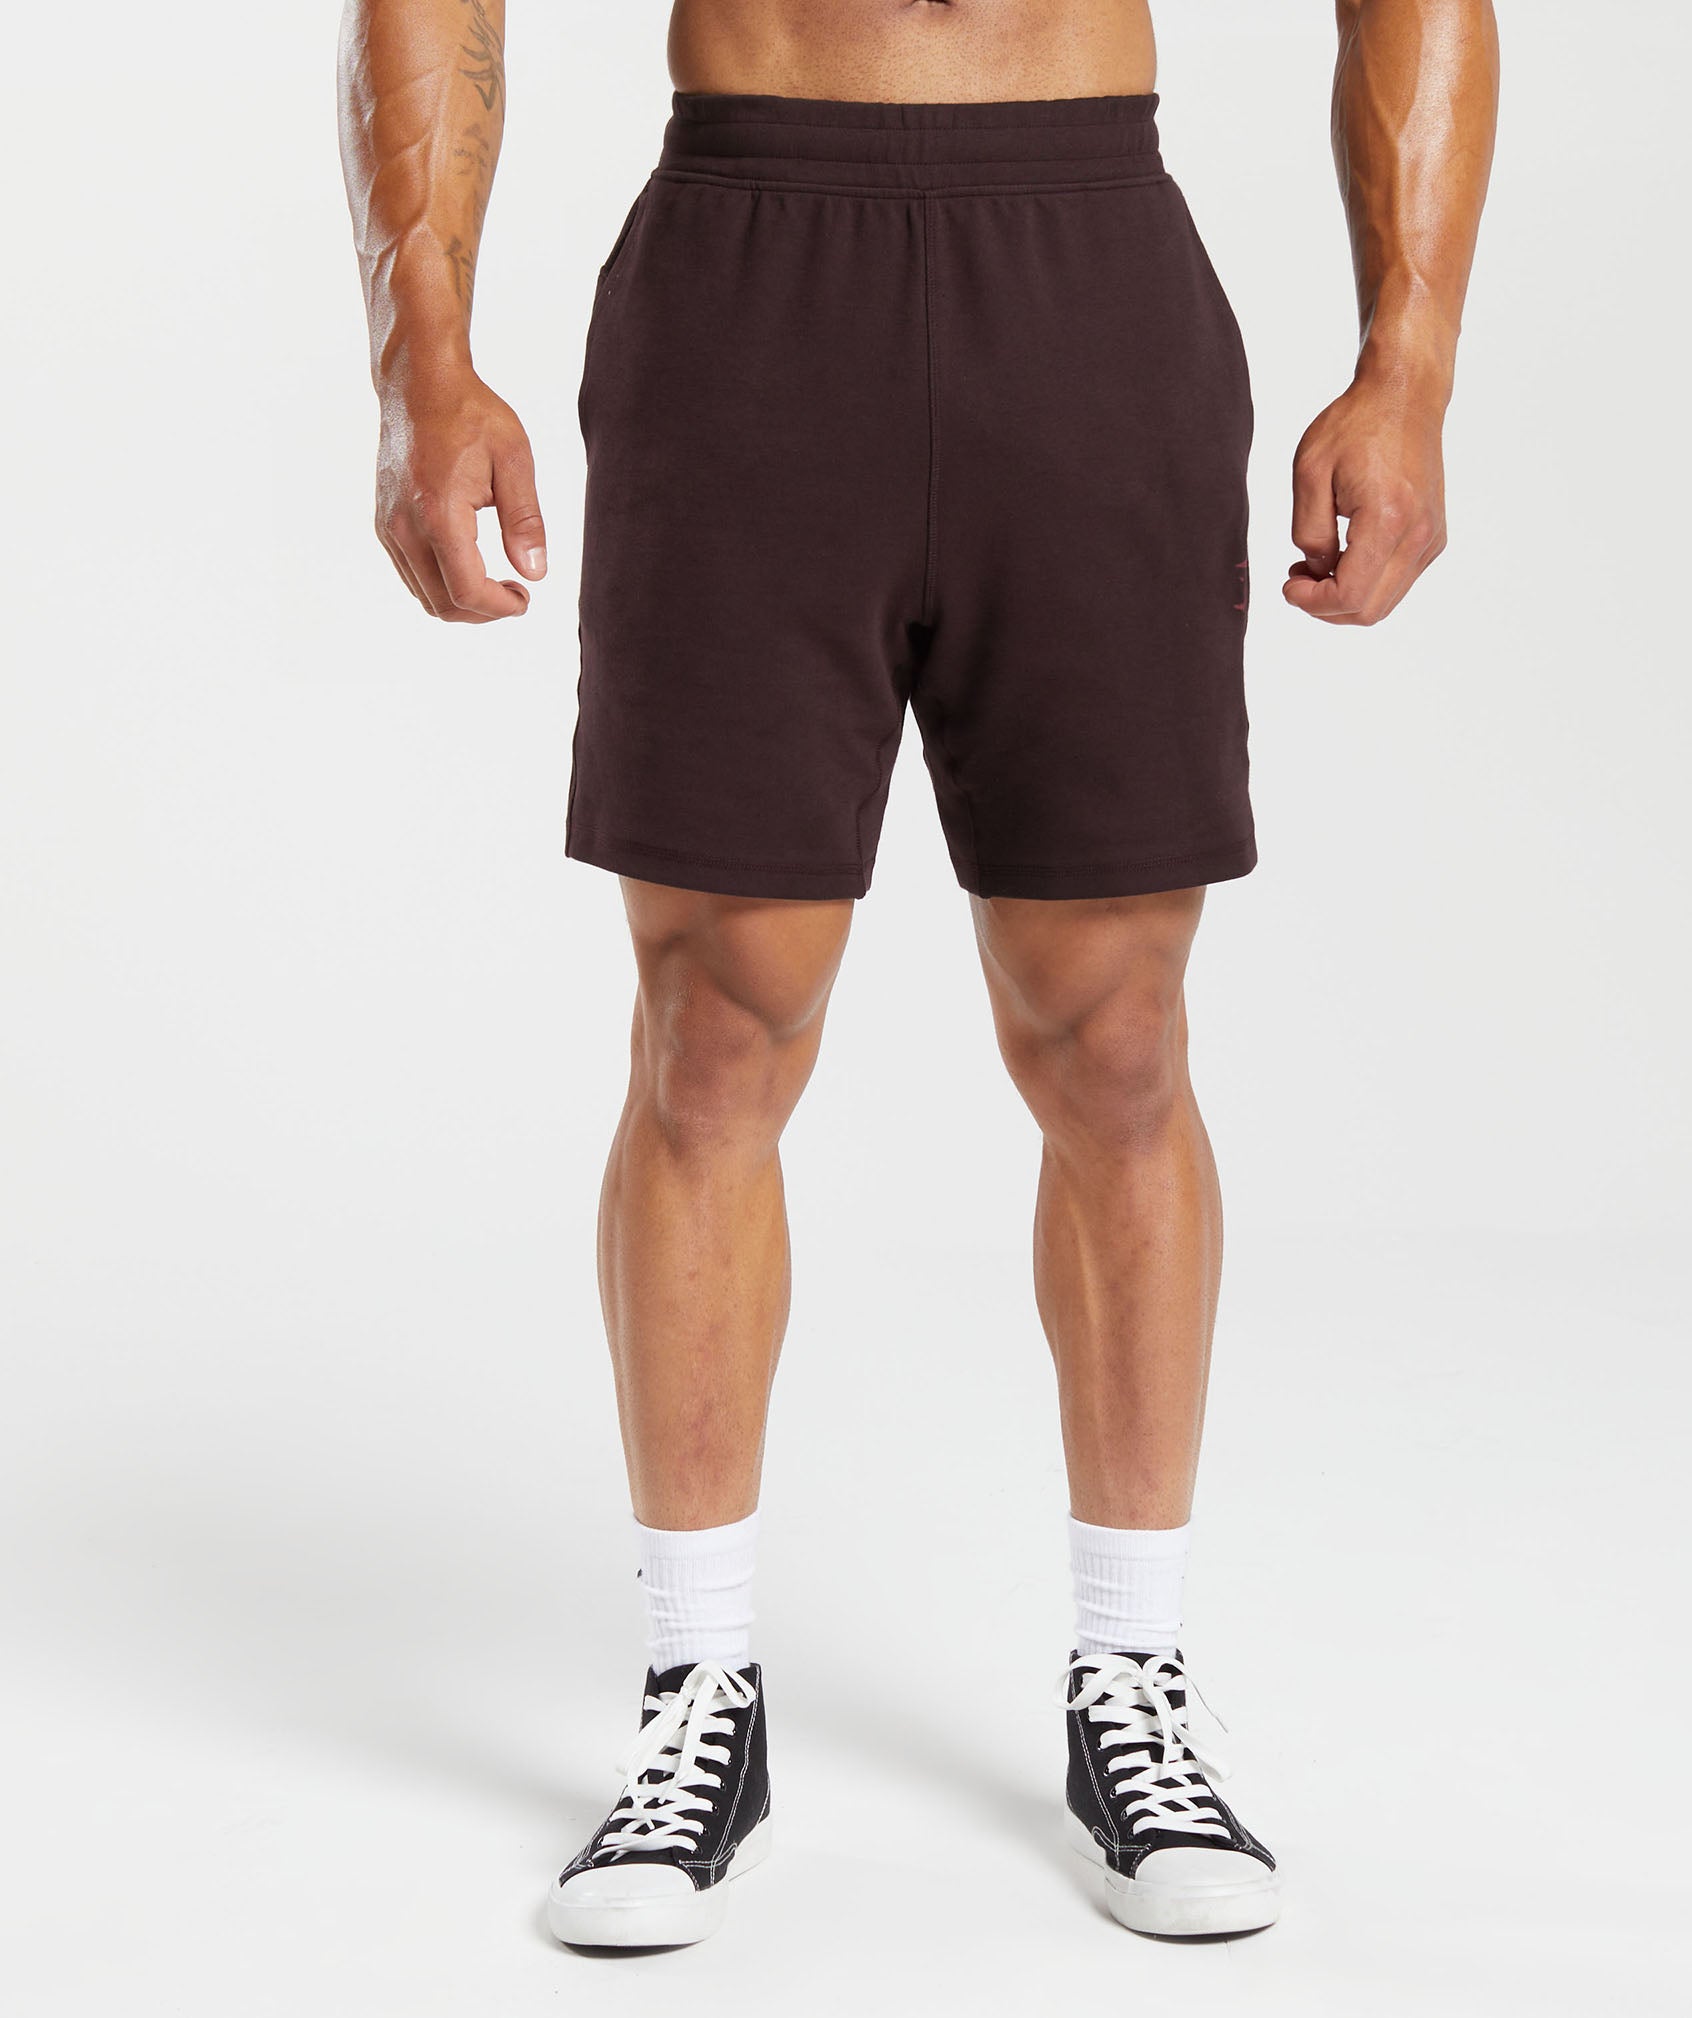 Bold 7" Shorts in Plum Brown - view 2